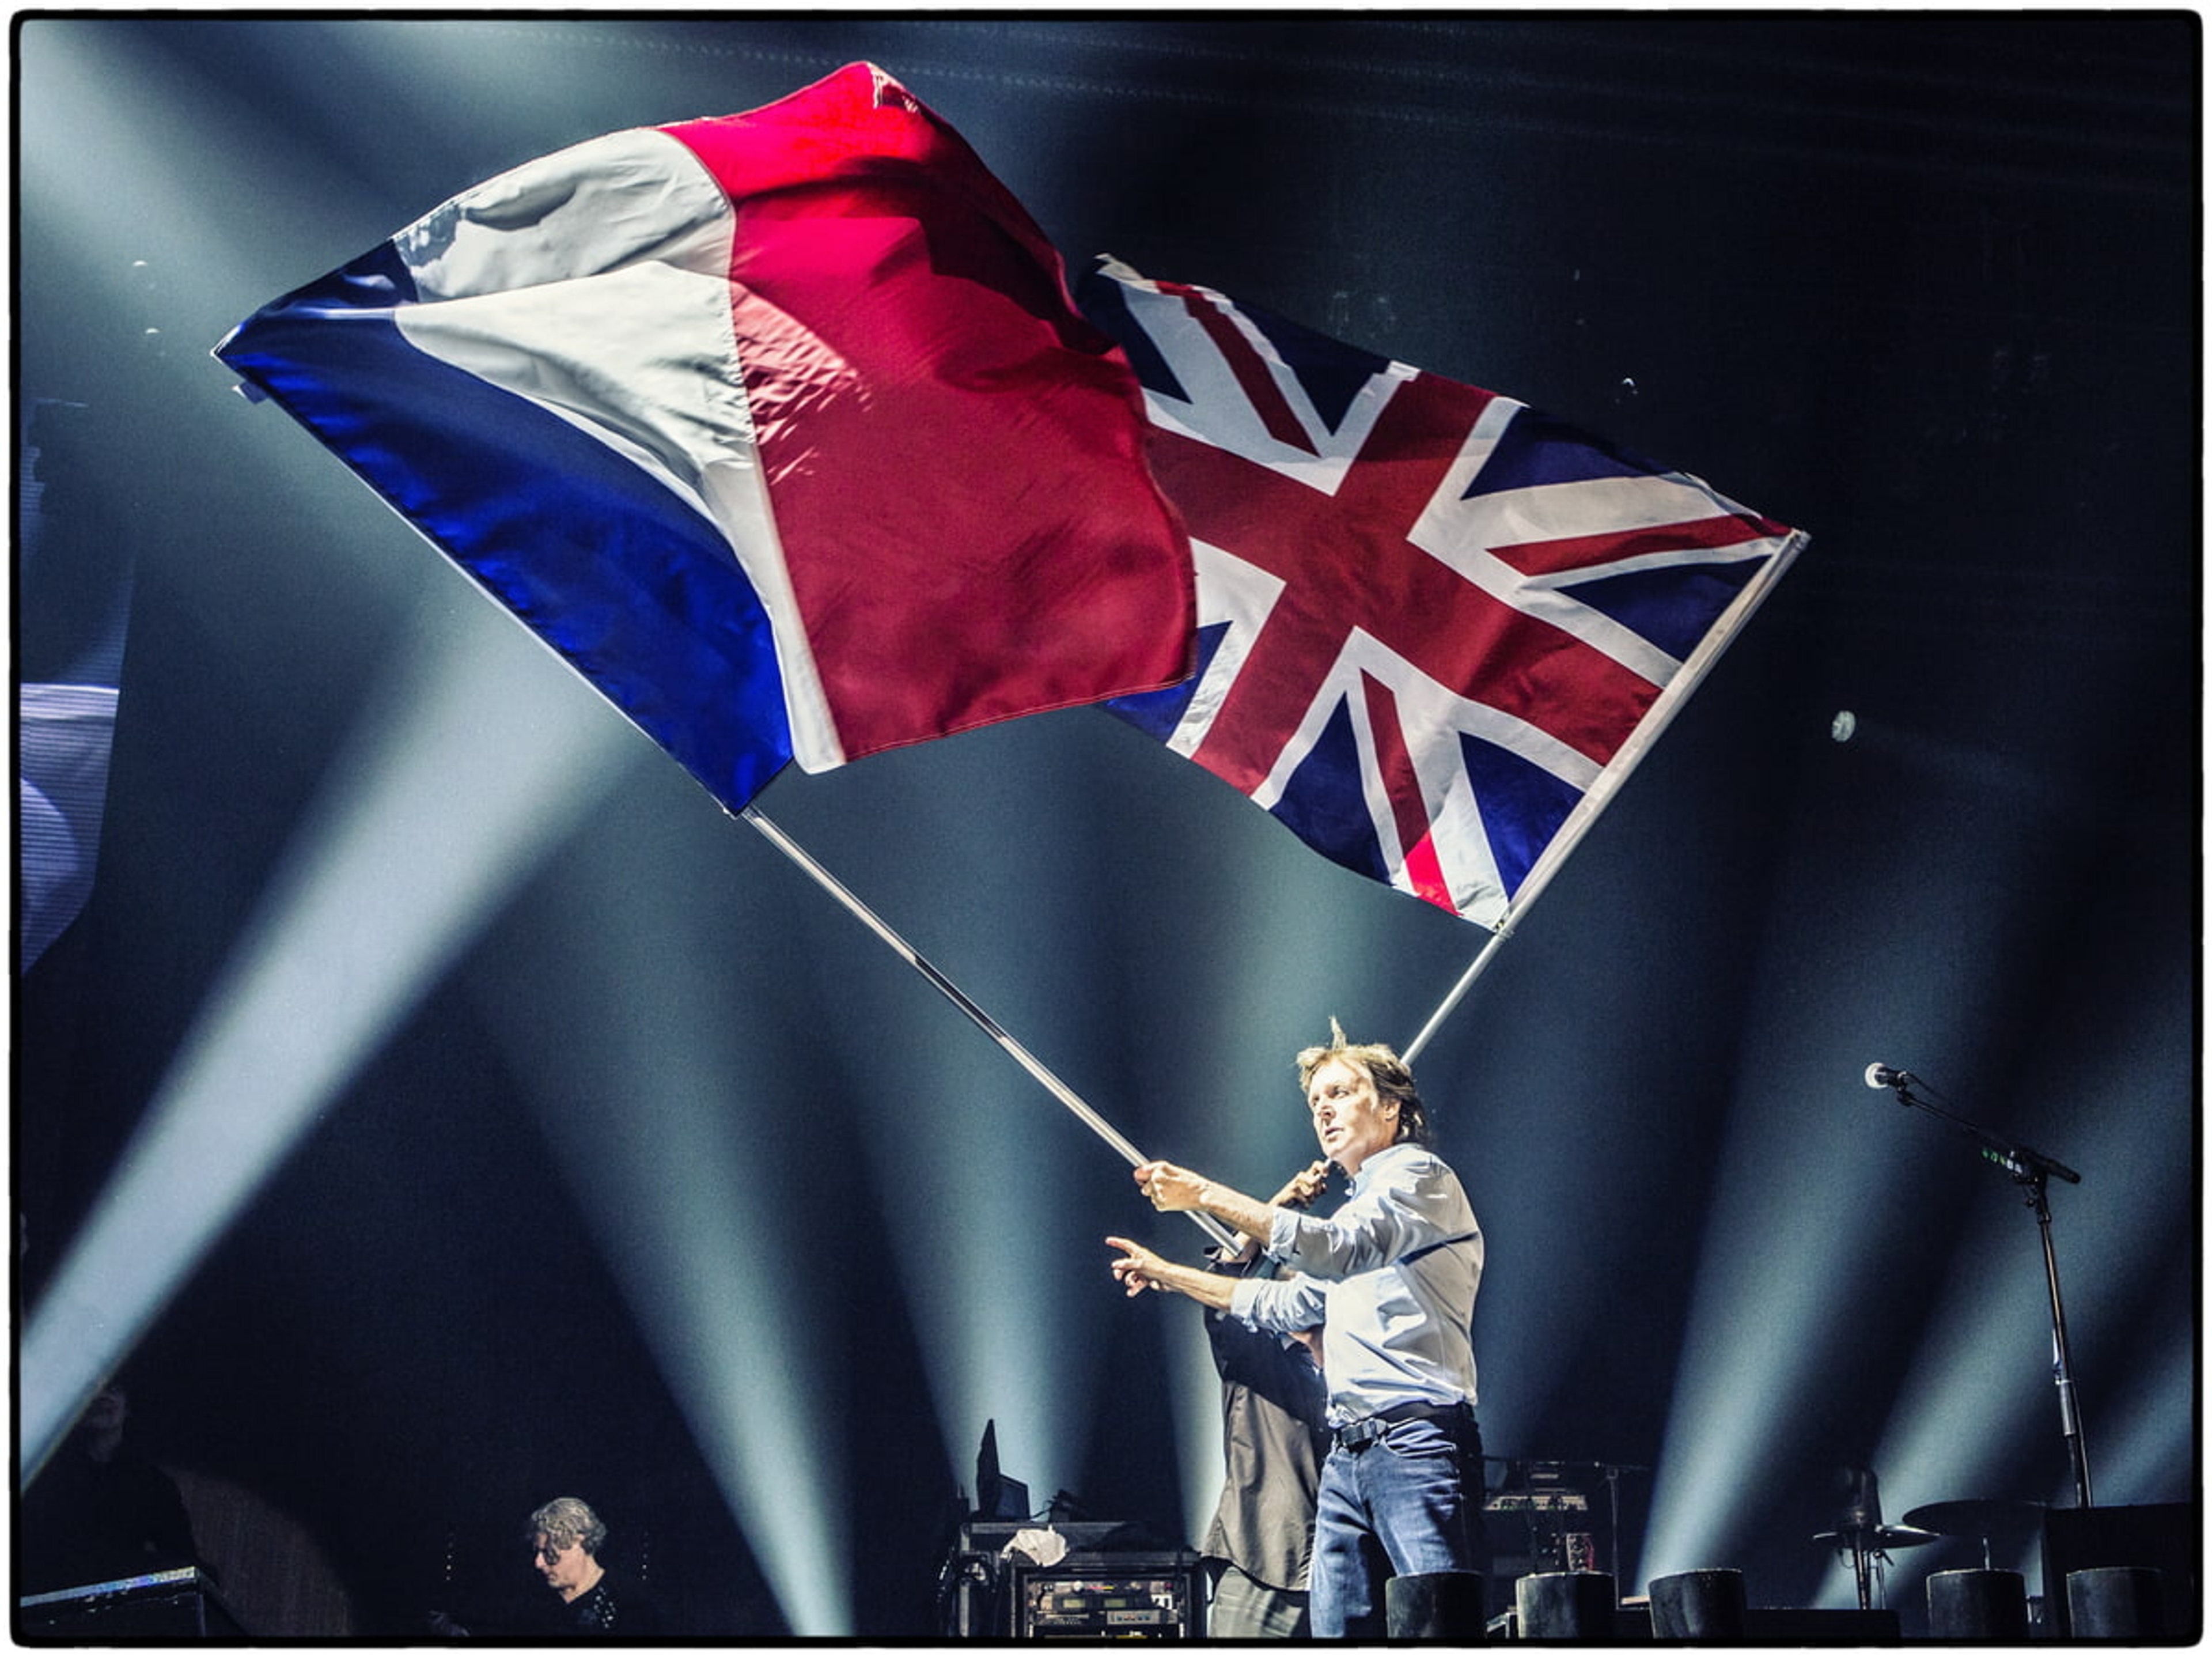 French and British flags flying in Paul's Paris show